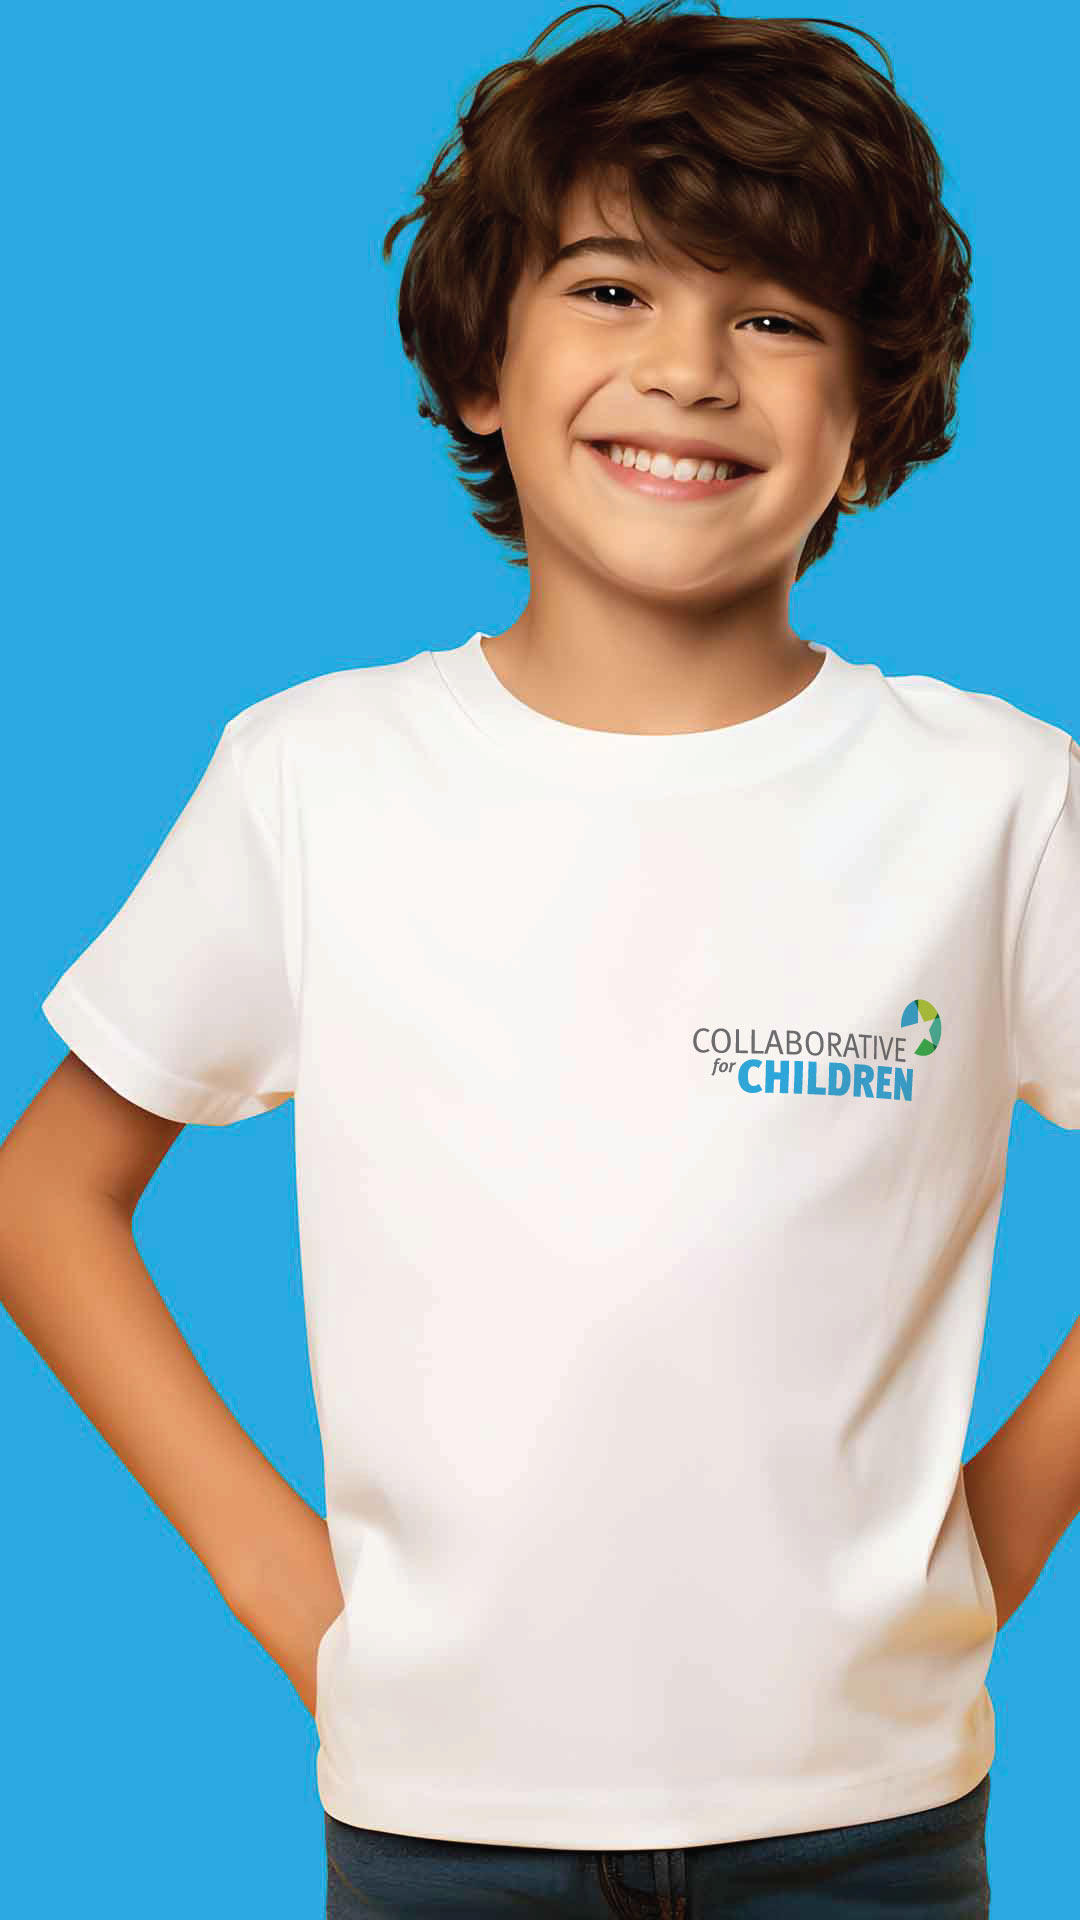 A kid smiles with client logo on t-shirt.